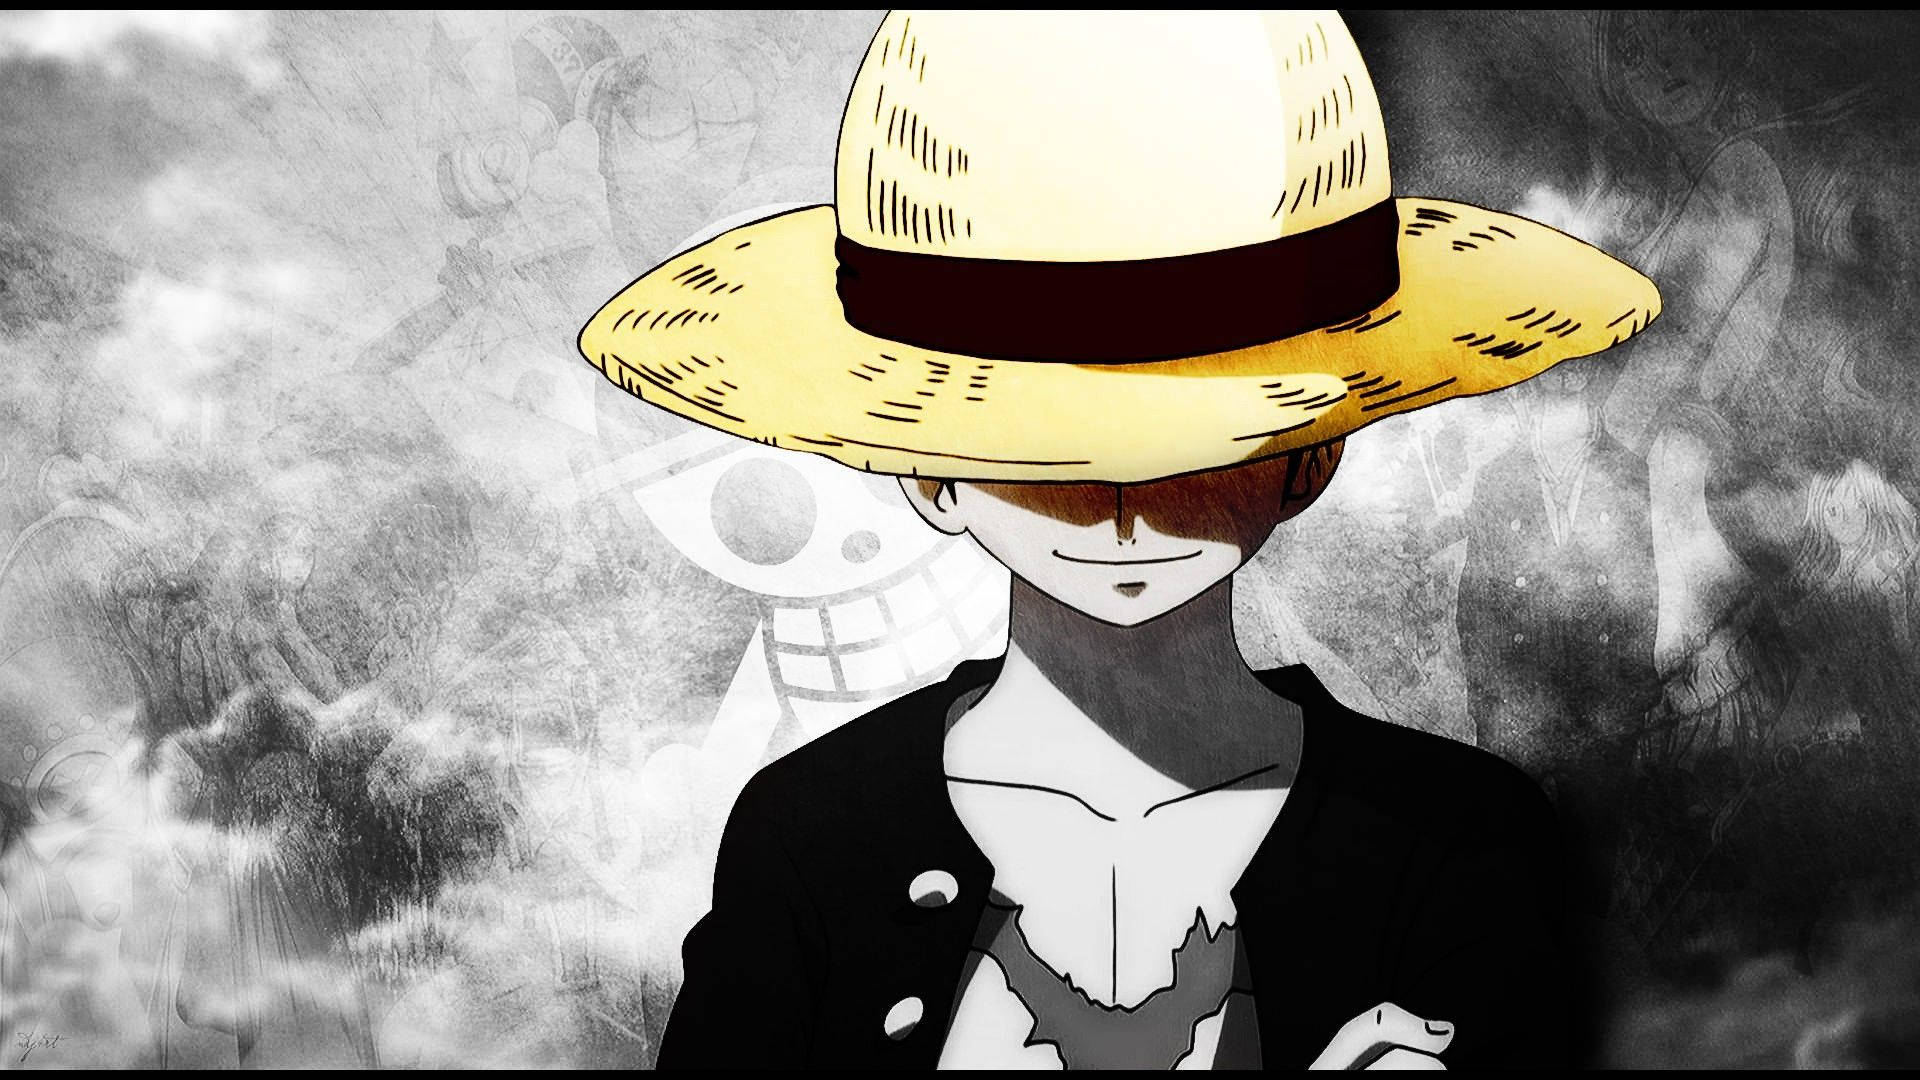 Monkey D. Luffy, The Main Protagonist Of One Piece, Fighting Alongside His Crew Of Straw Hat Pirates Background